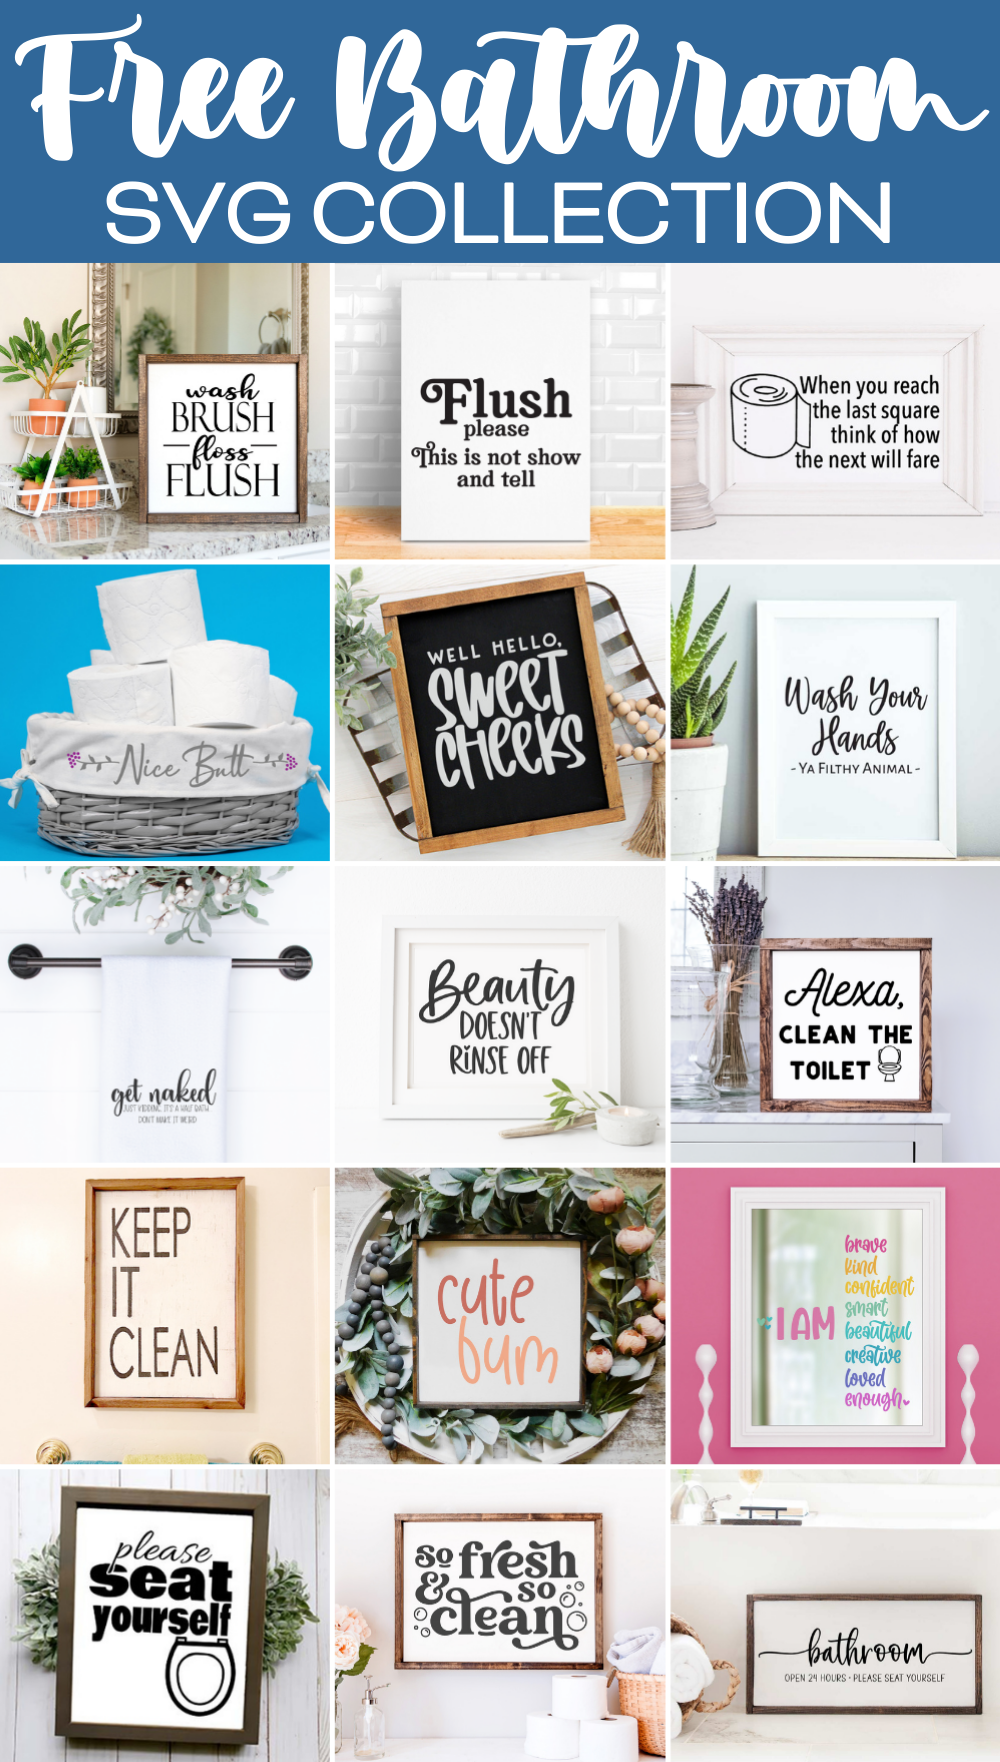 Bathroom SVG Collection - 15 free cut files for your bathroom